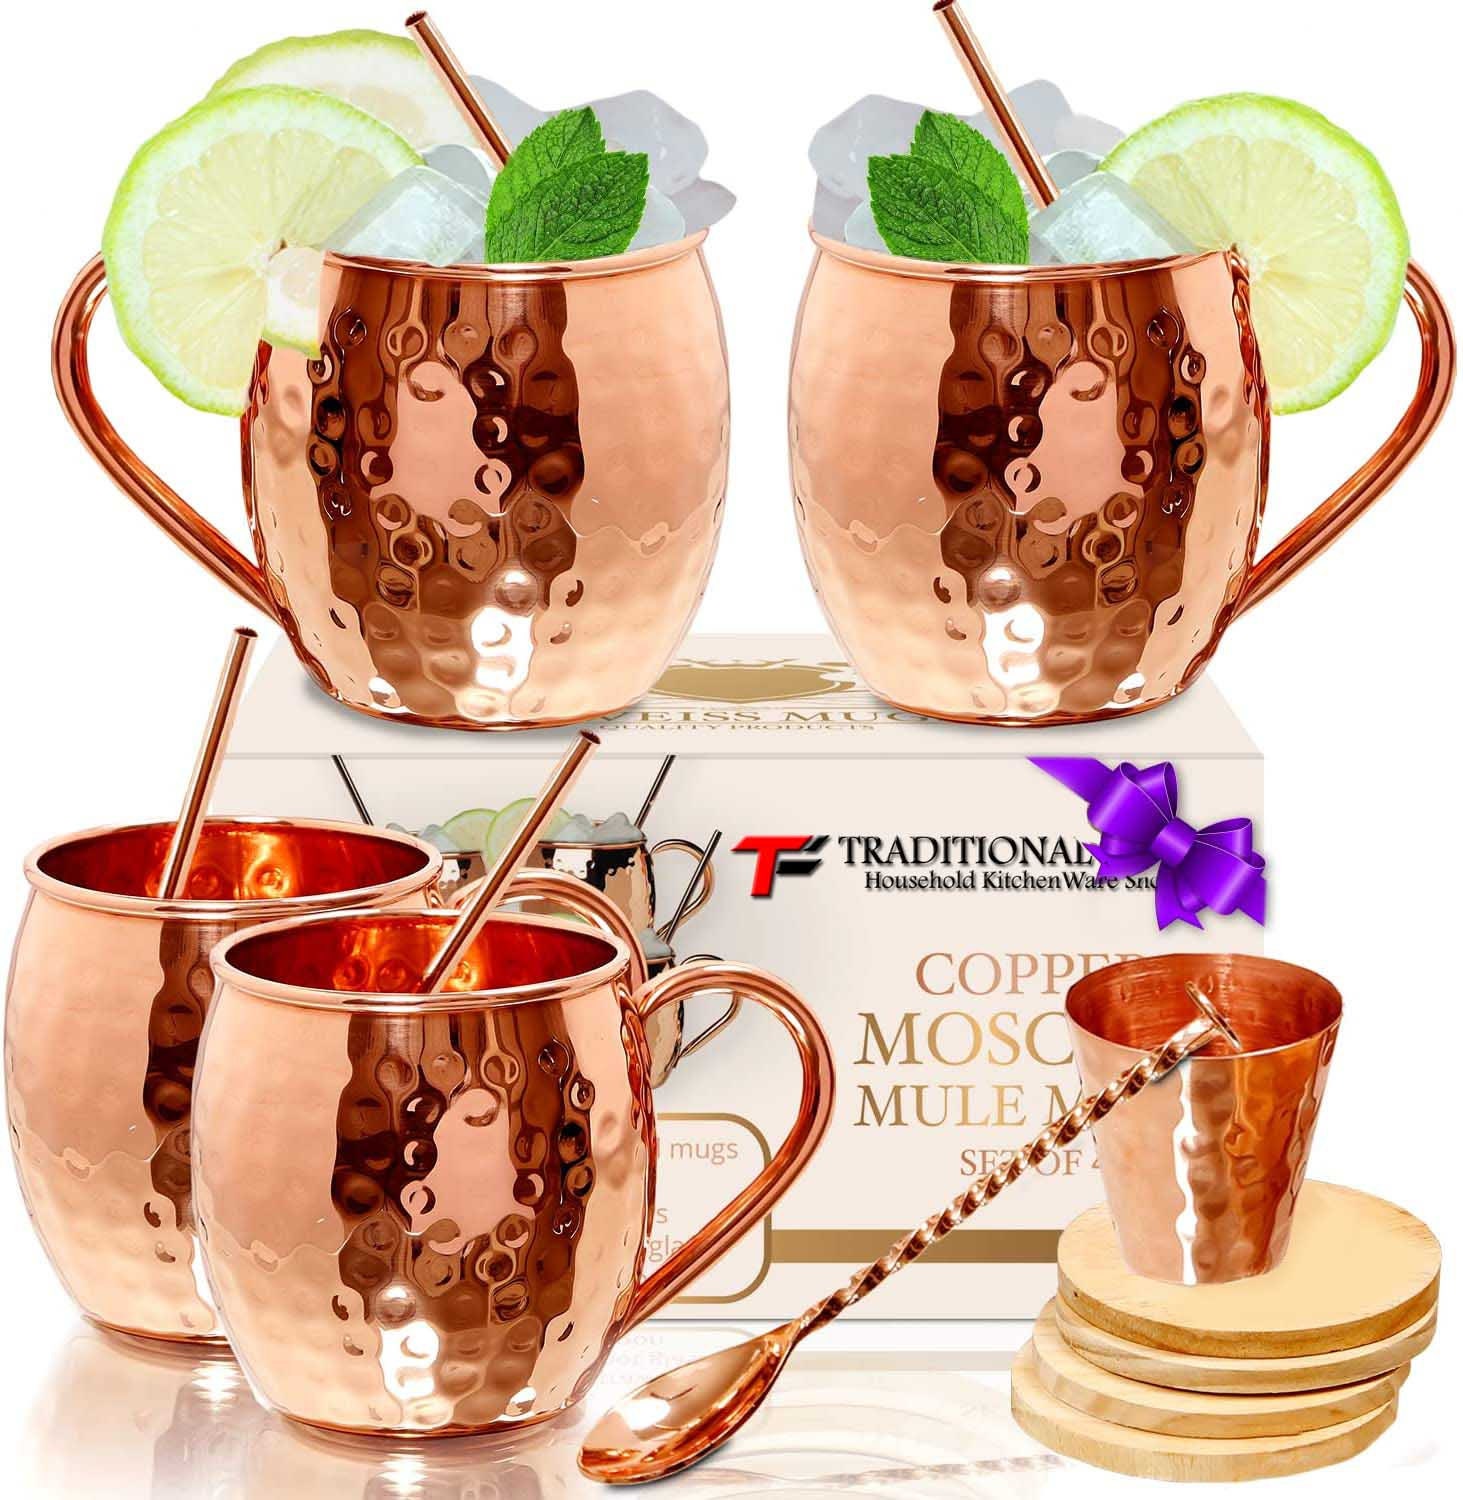 100% Solid Copper Handcrafted Authentic Hammered Copper Cups for Moscow Mules Includes Shot Glass Recipe Book Pure Copper Moscow Mule Mugs Set of 4 